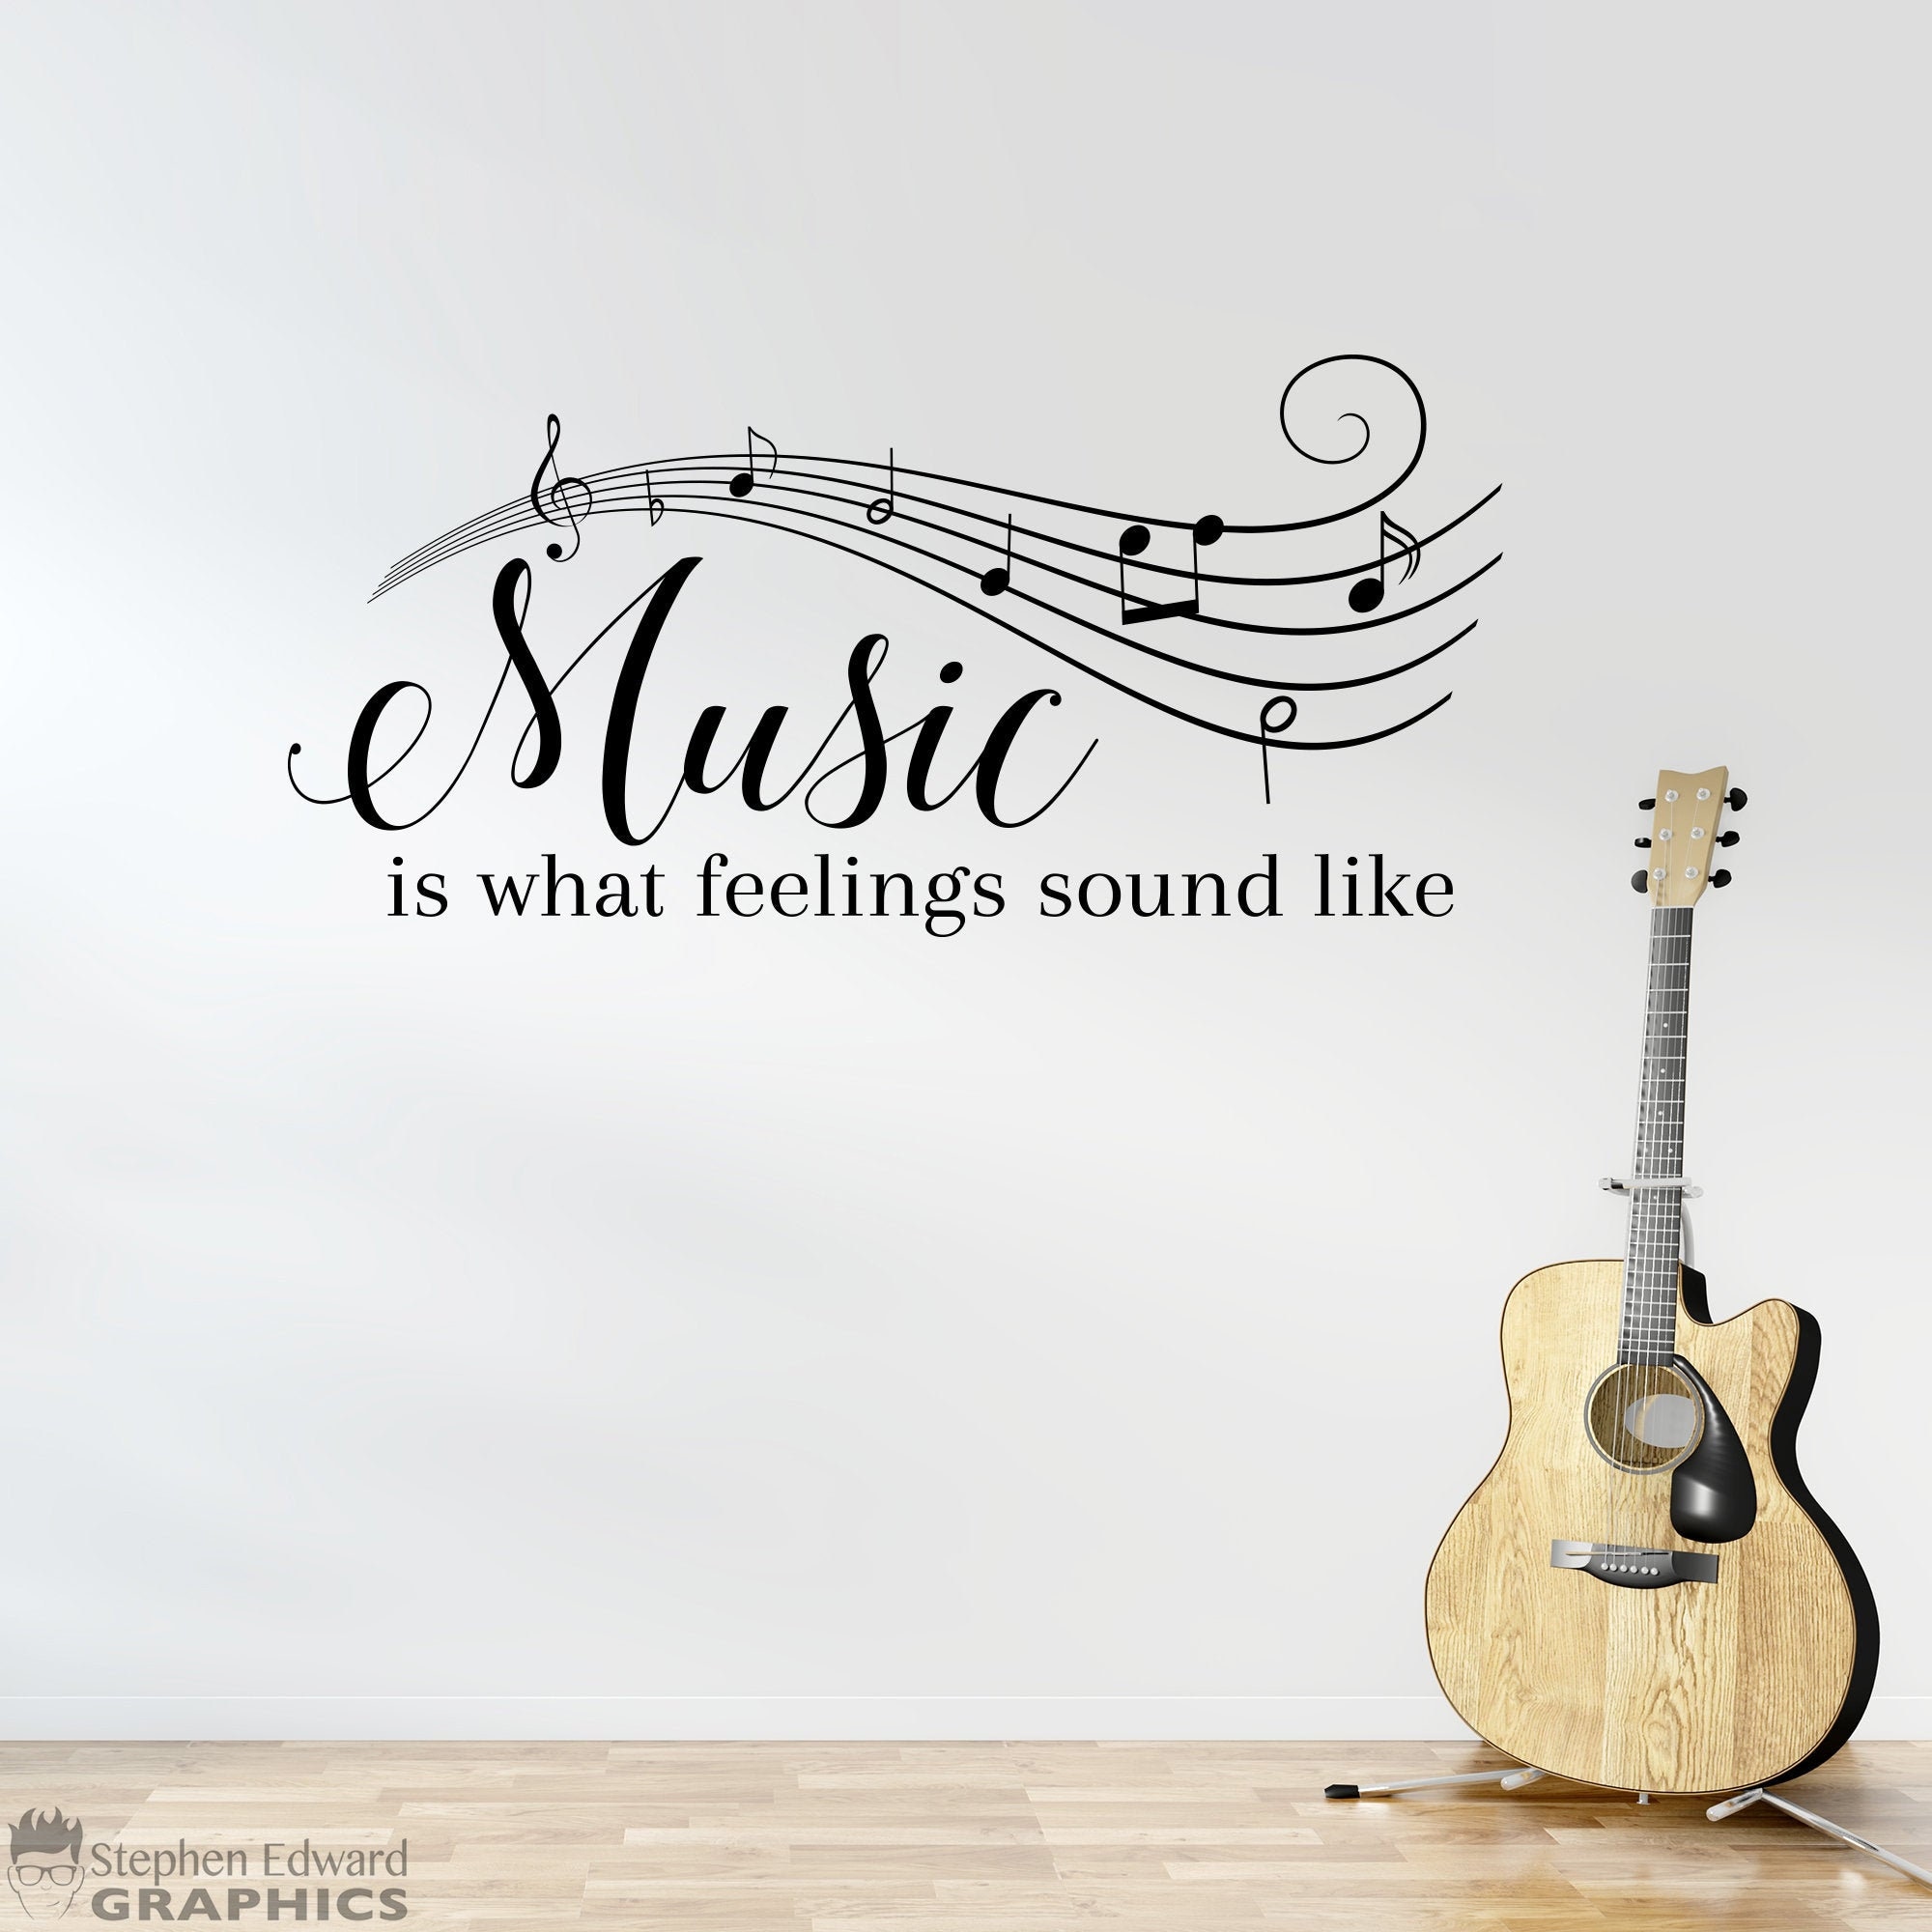 MUSIC IS WHAT FEELINGS SOUND LIKE VINYL WALL DECAL QUOTE LETTERING STICKER 36" 